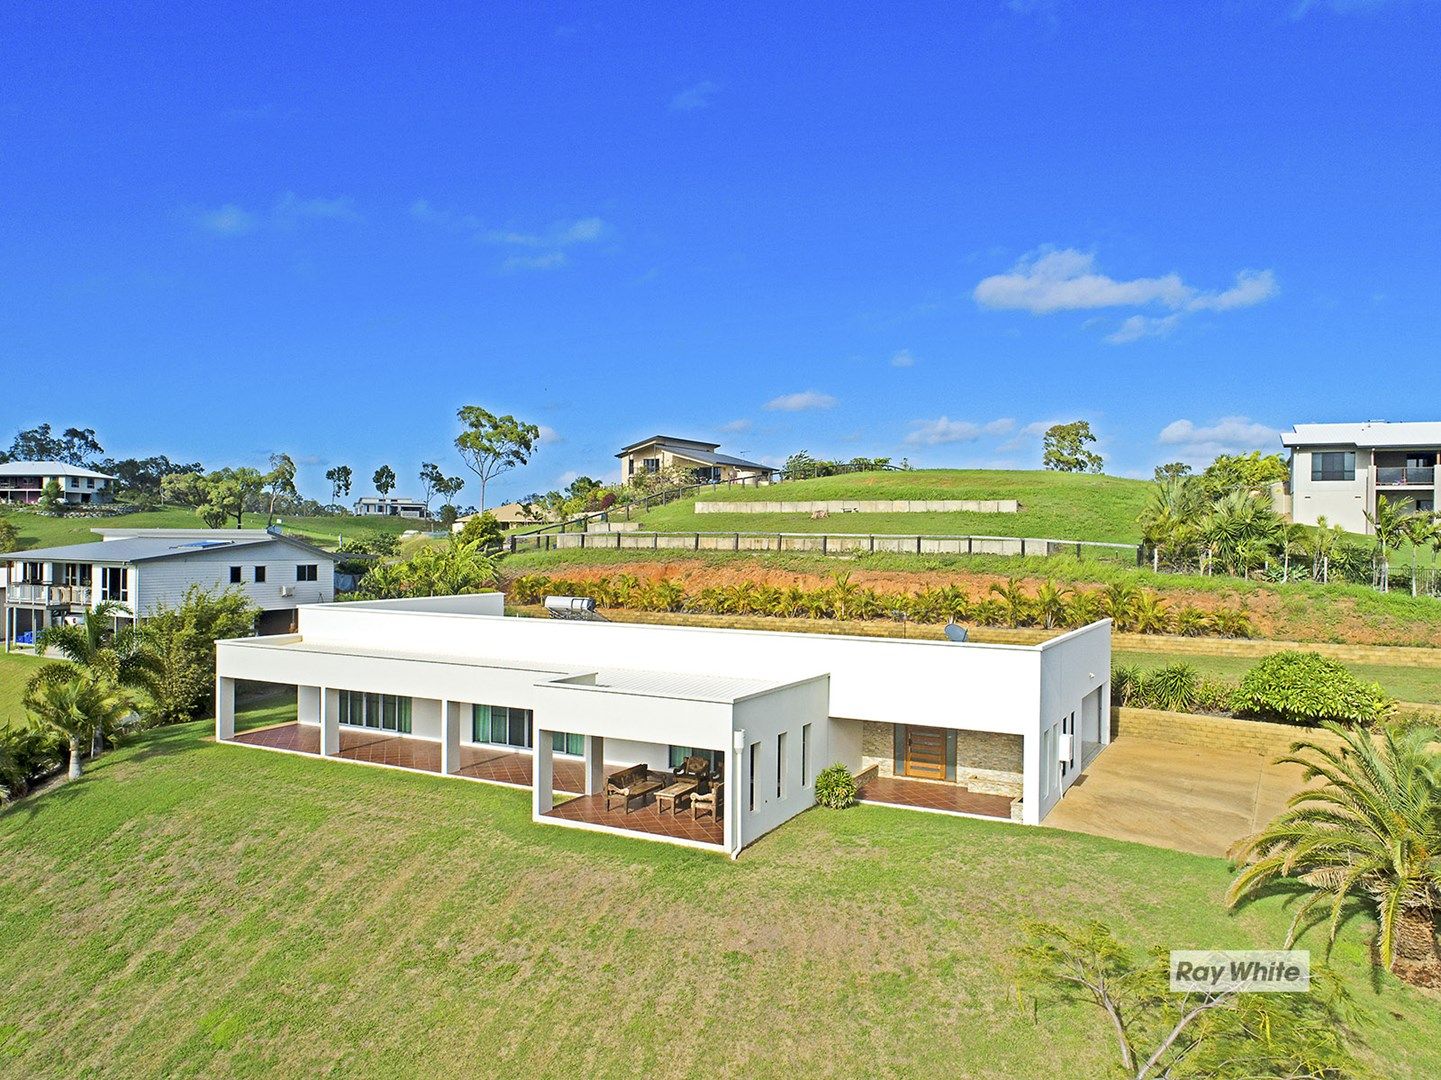 15 Brumby Drive - APPLICATION APPROVED, Tanby QLD 4703, Image 0